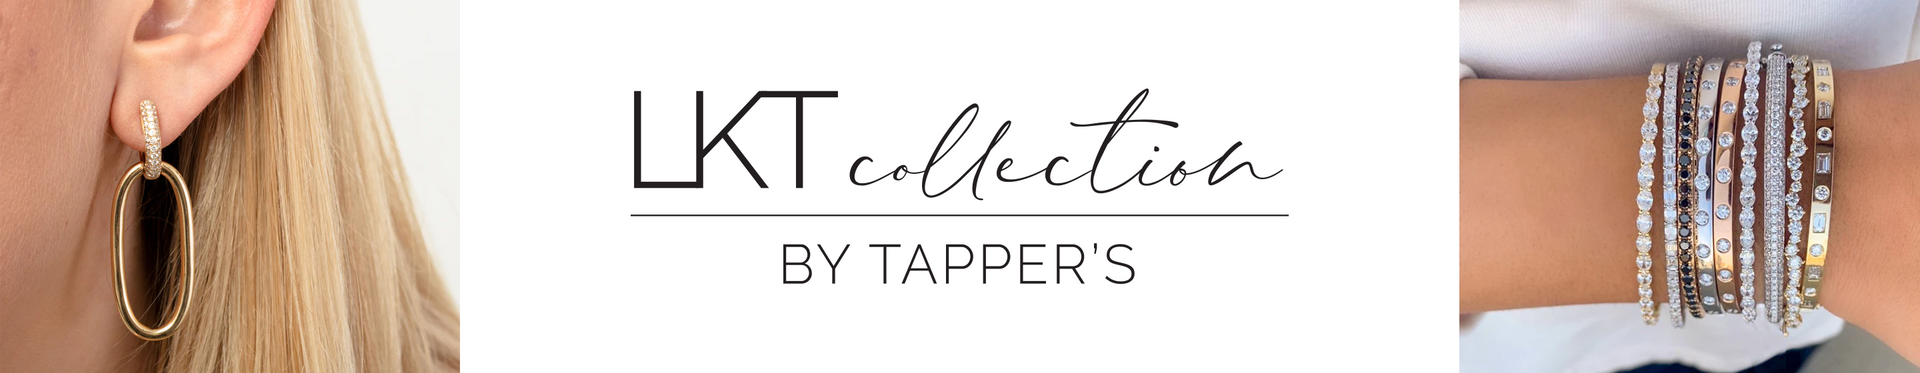 LKT Collection by Tapper's